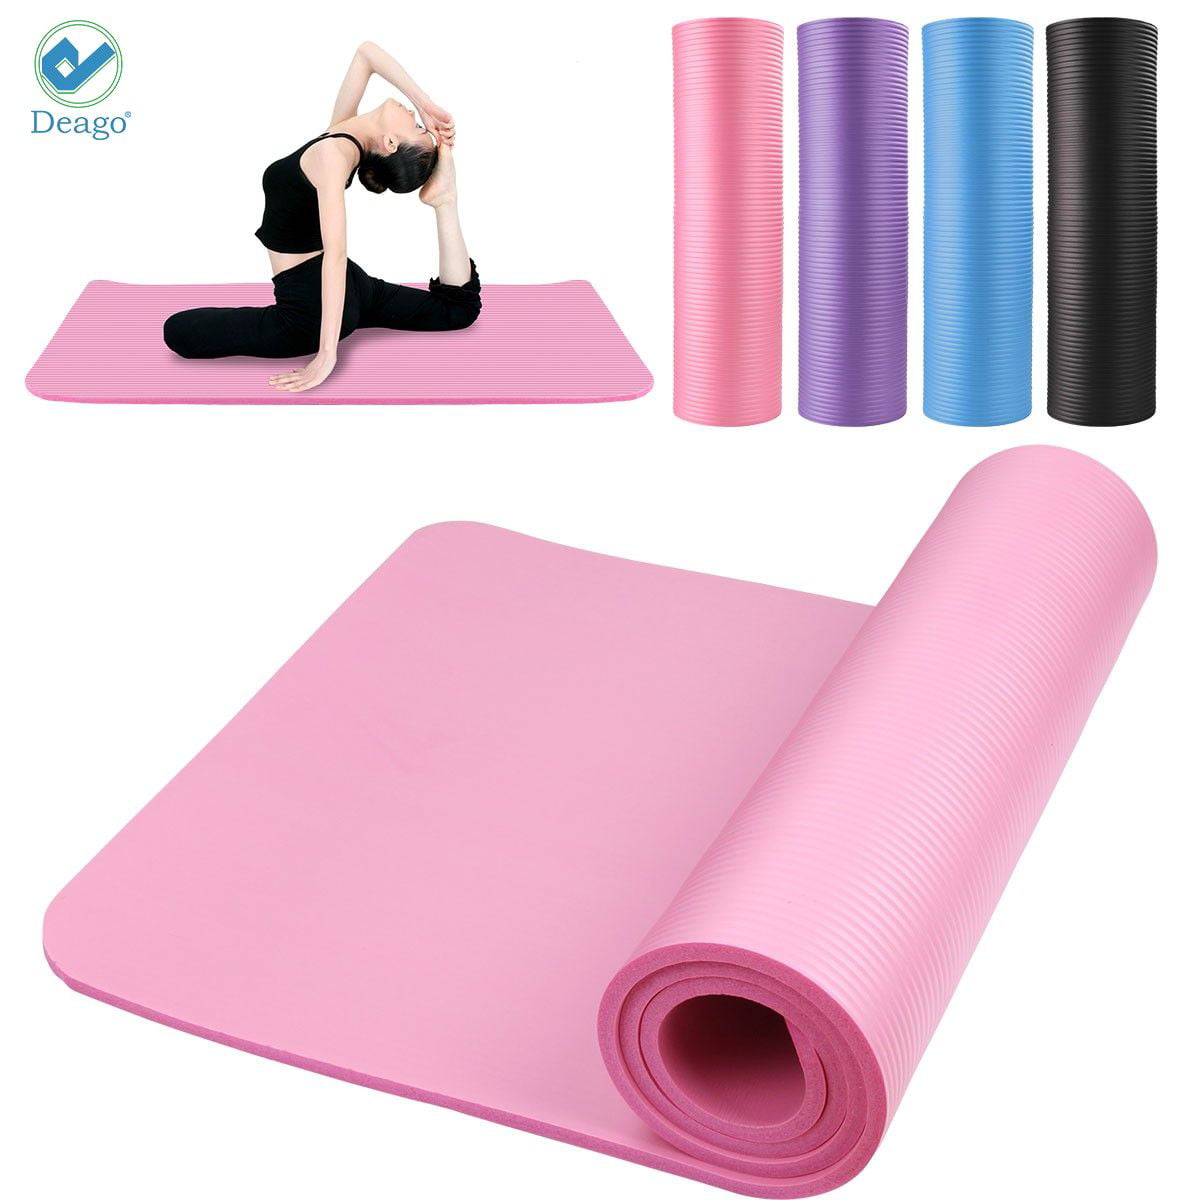 Exercise Yoga Mat Fitness Workout Soft 68"X24" Quick Drying Pilates GYM Training 